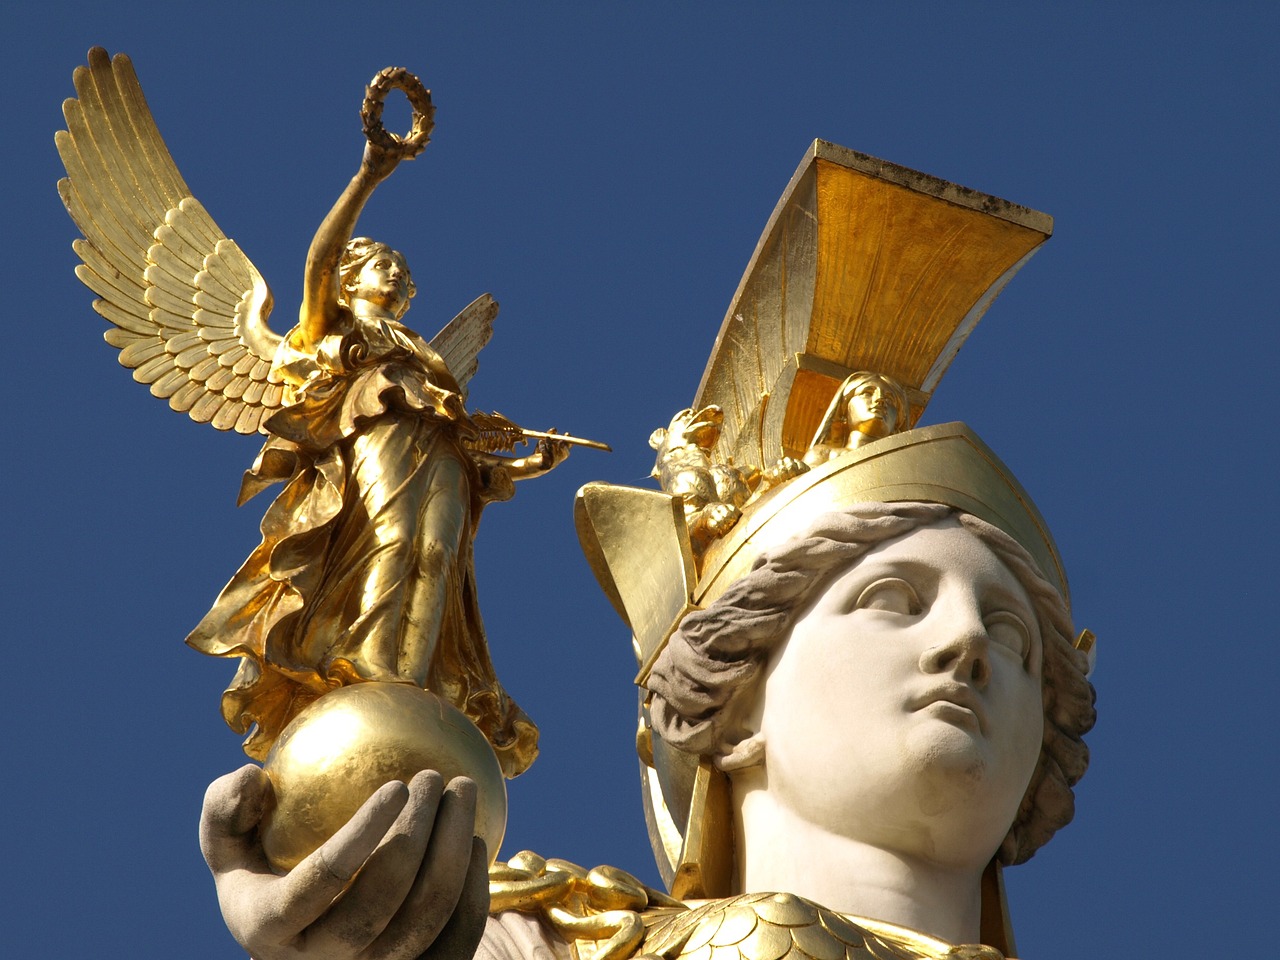 Statue of the Winged Goddess of Victory to represent Sports & Competition Events-Based Travel Ideas